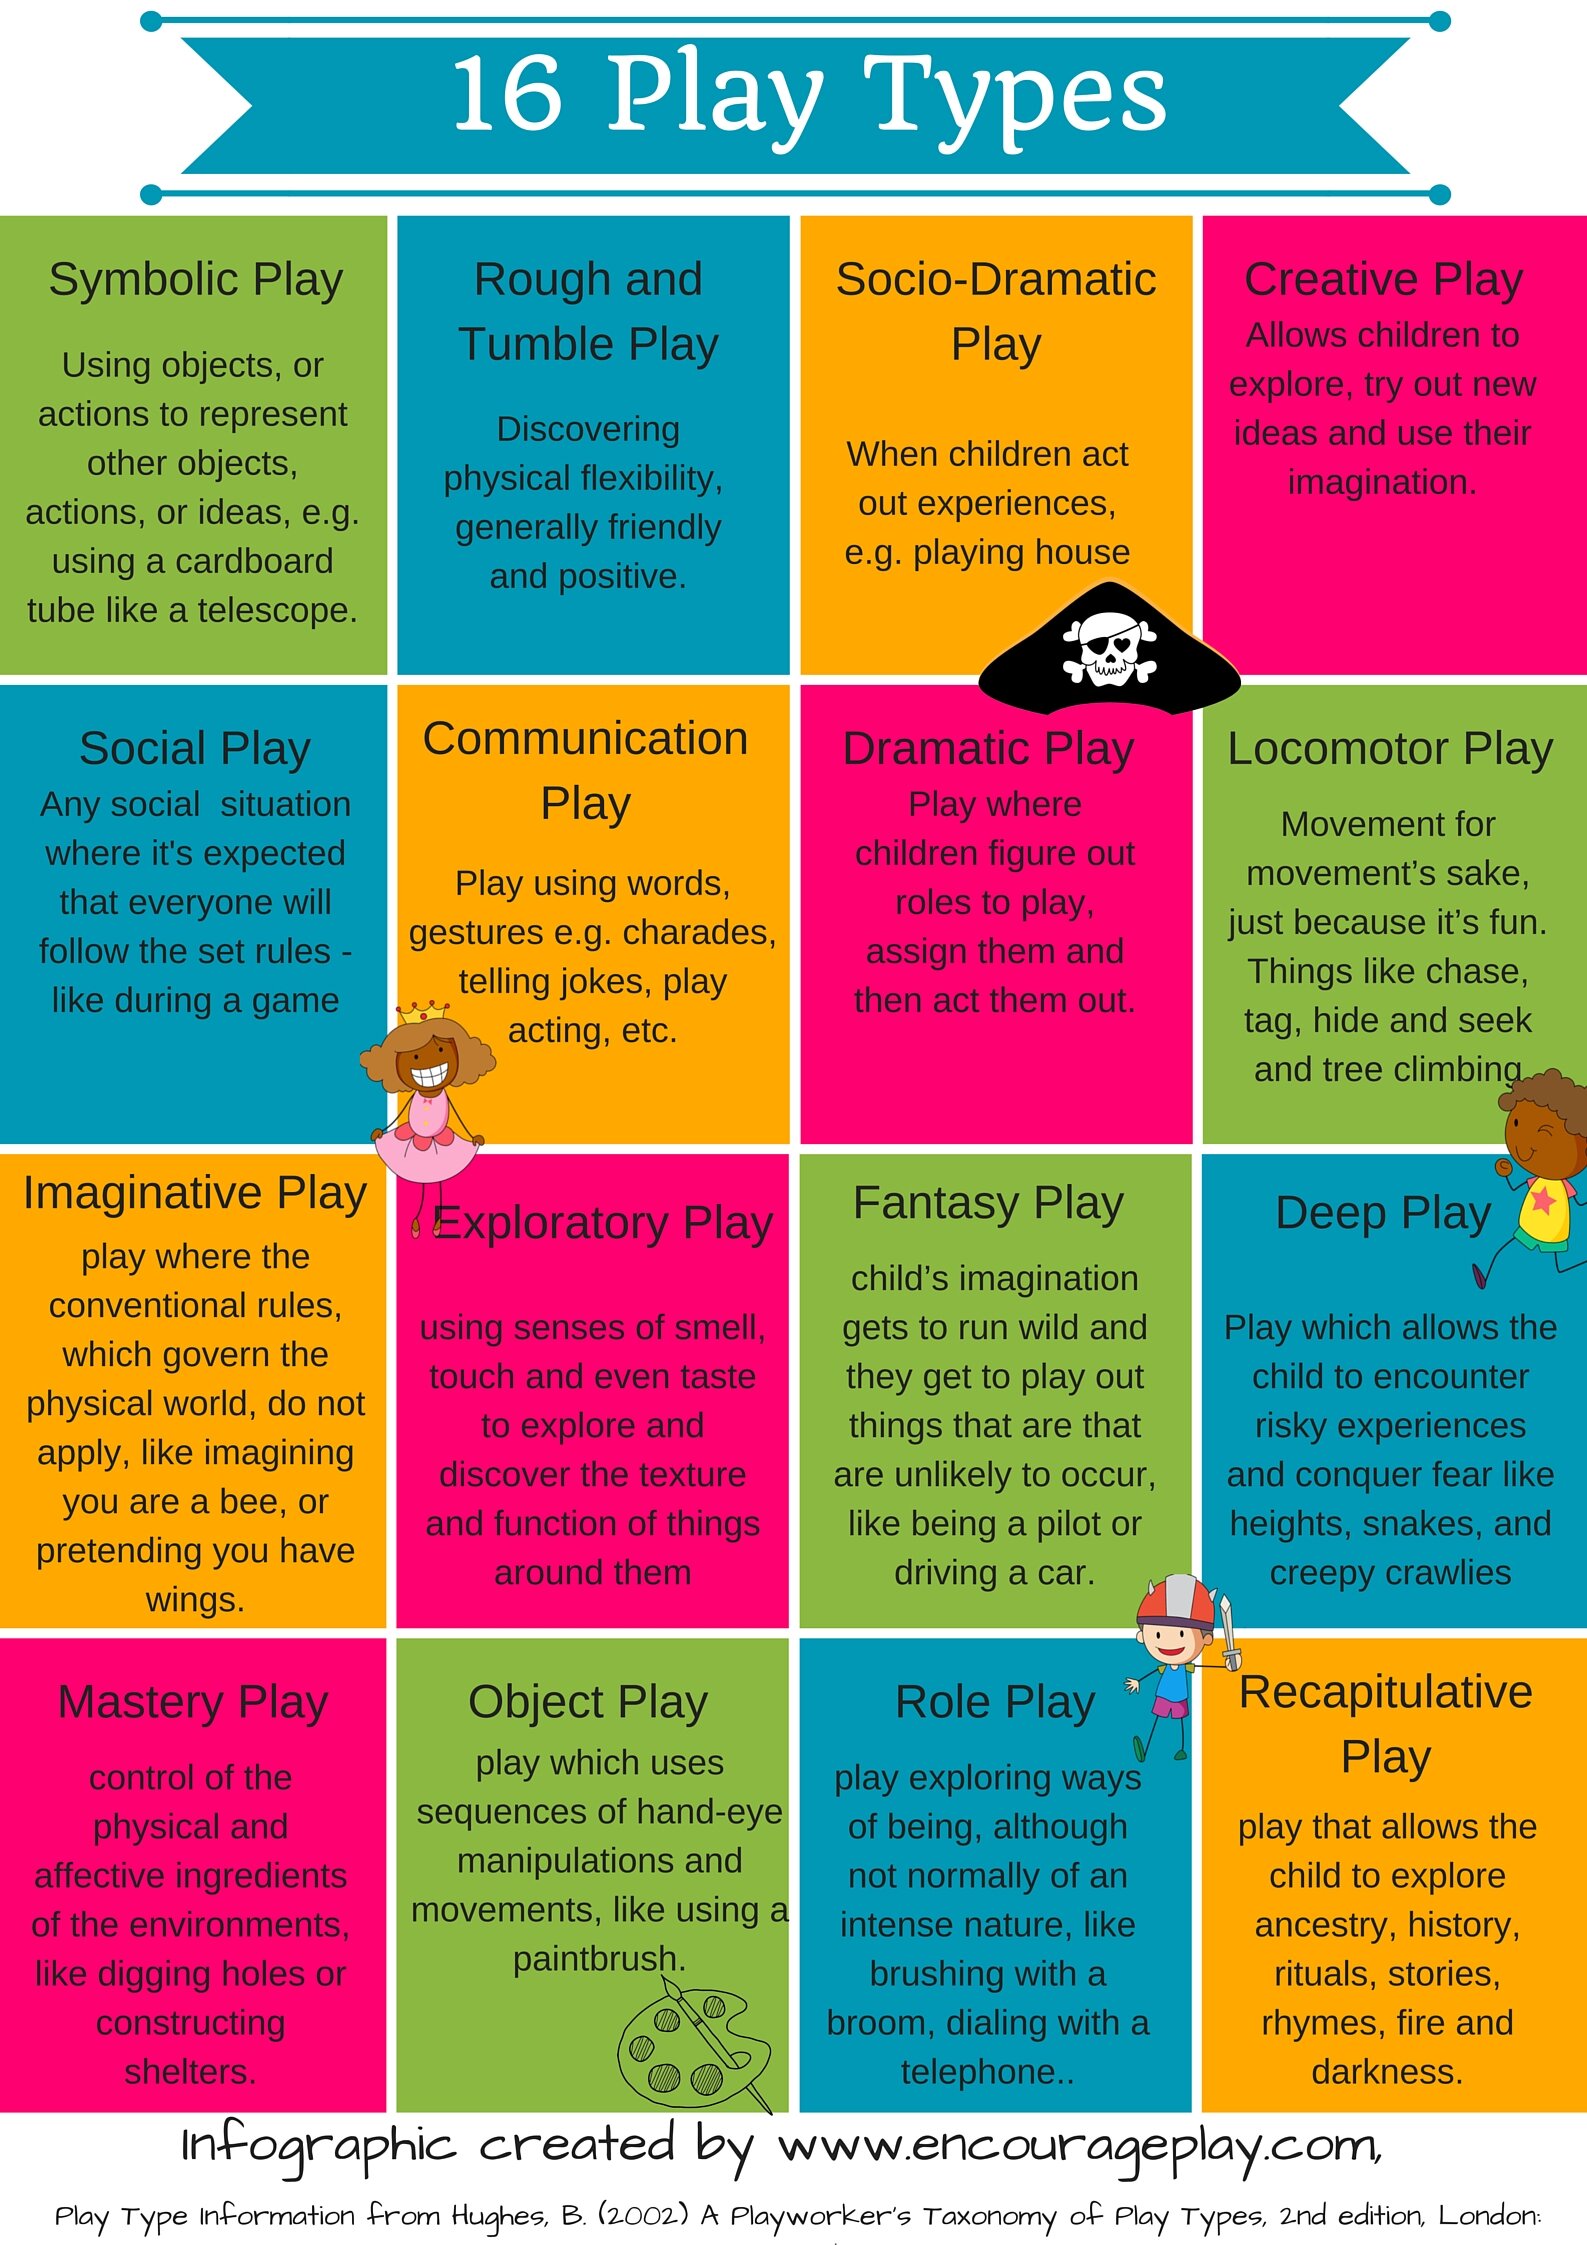 5 benefits of role play for children